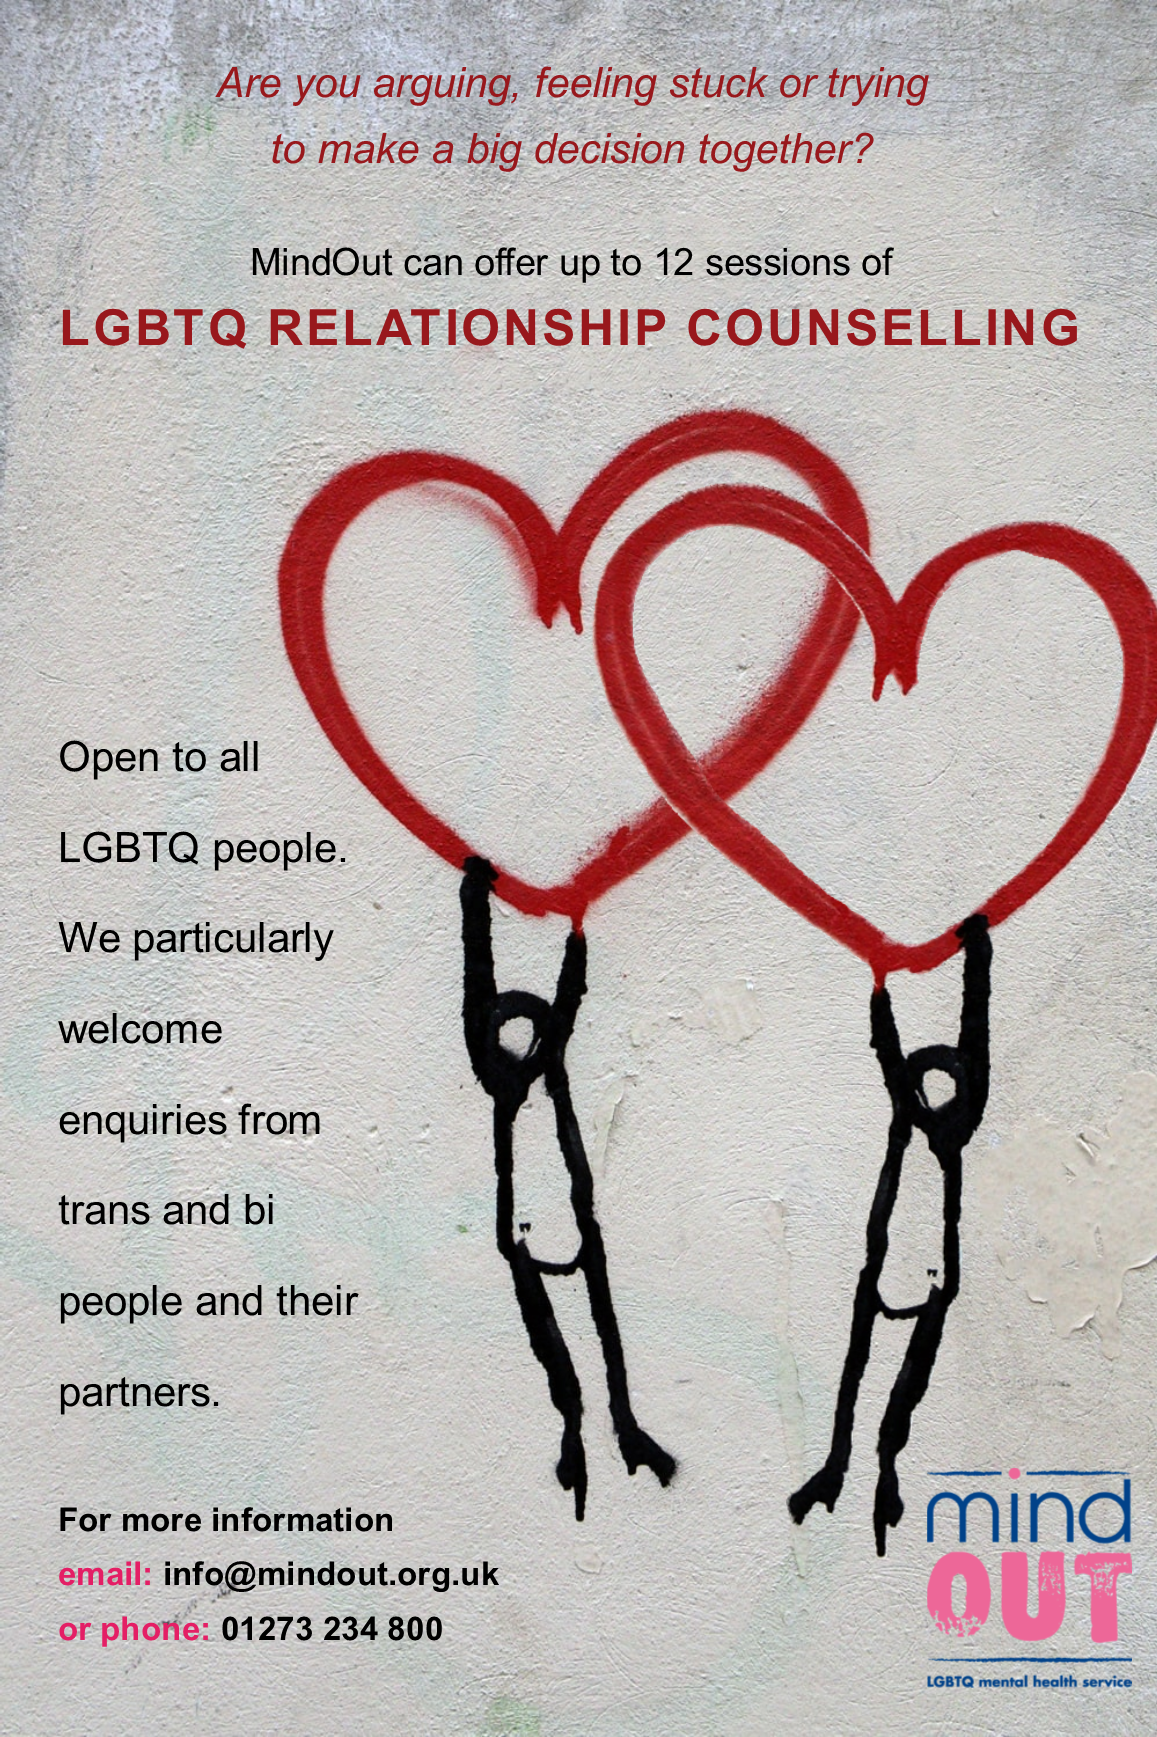 lgbtq relationship counselling flyer - features two stick figures holding onto one red love heart each. the hearts are overlapping and the stick figures are facing away from each other.